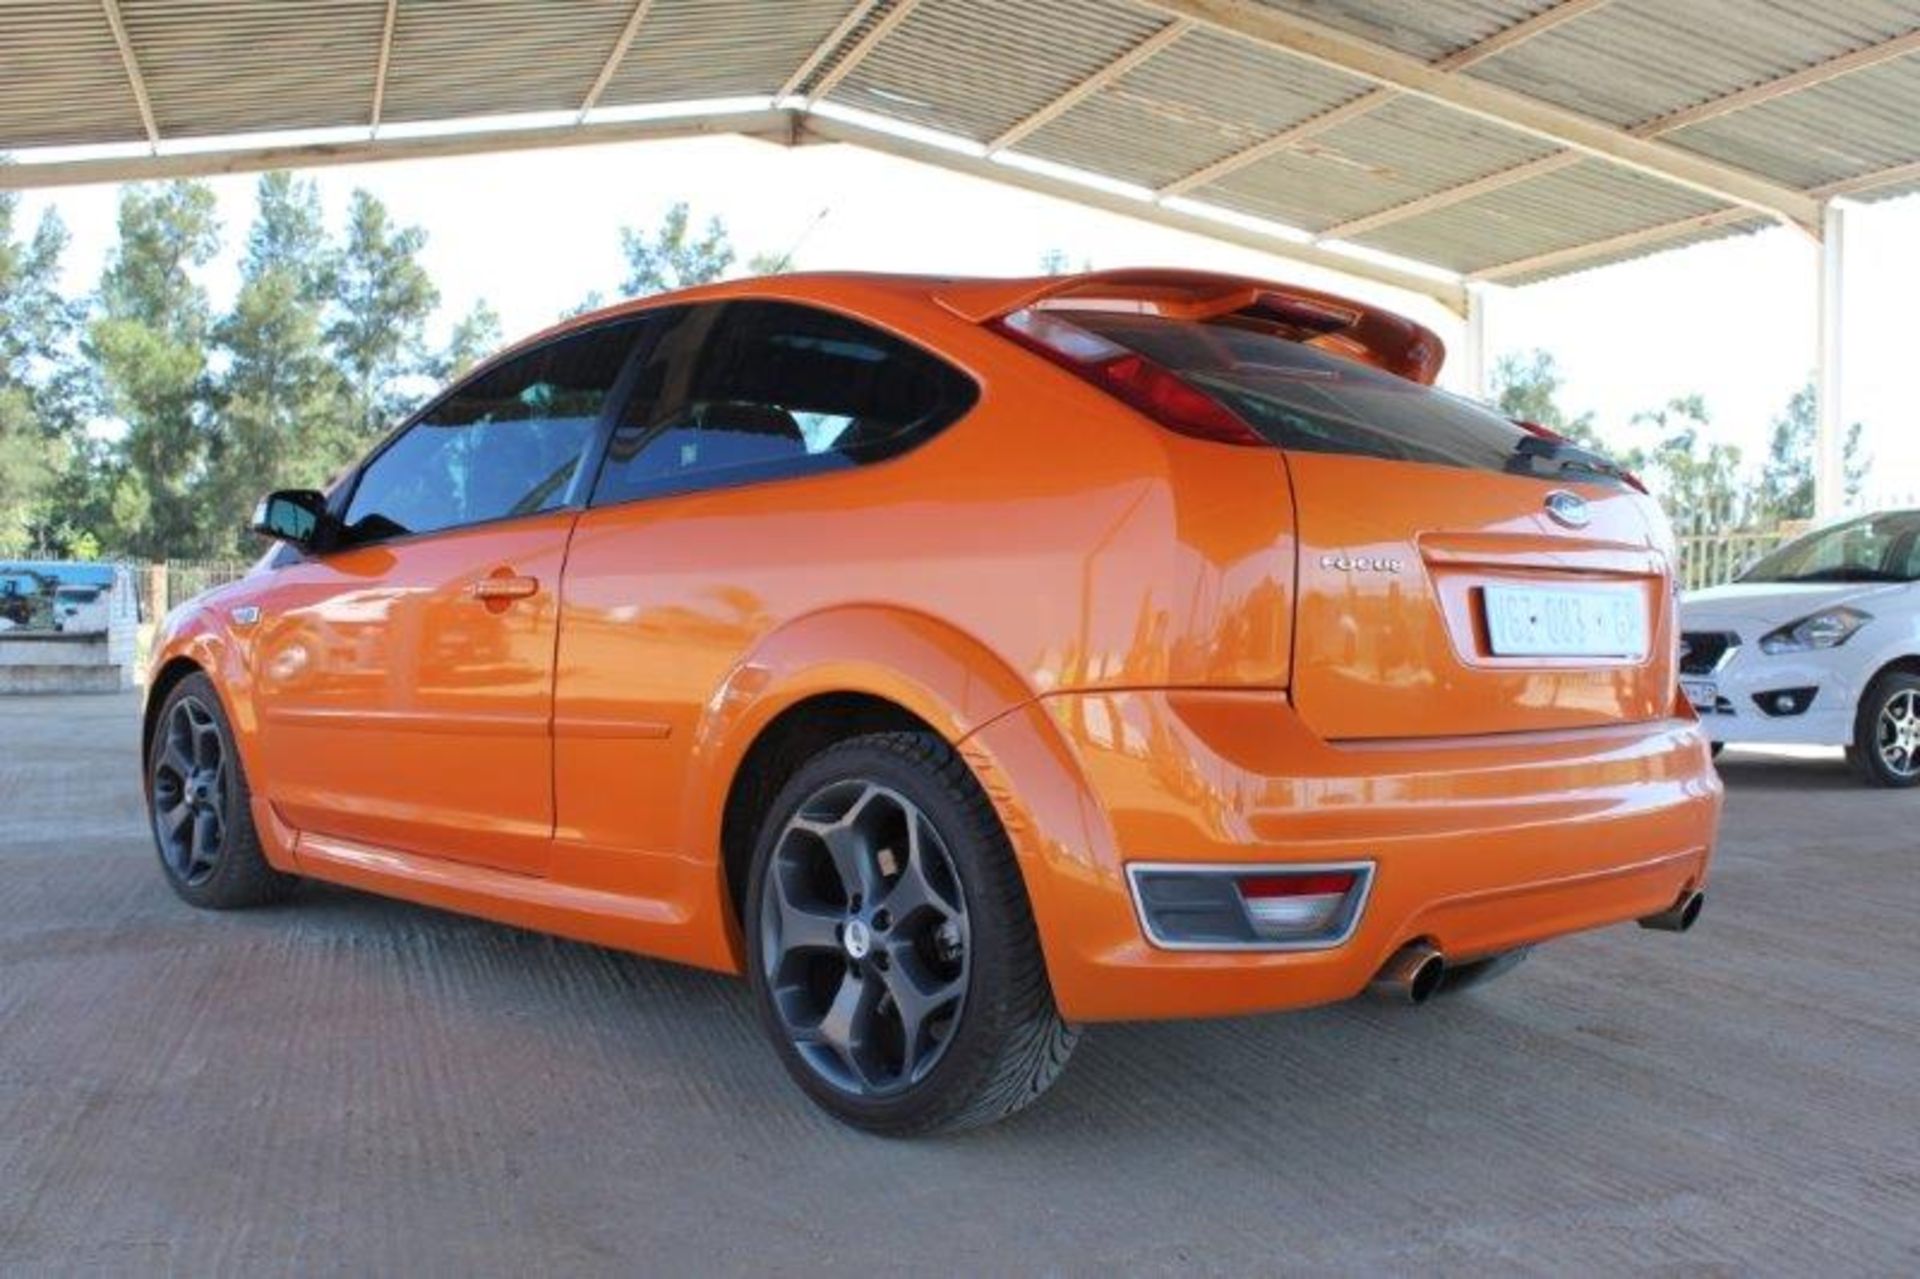 FORD FOCUS ST - Image 3 of 5